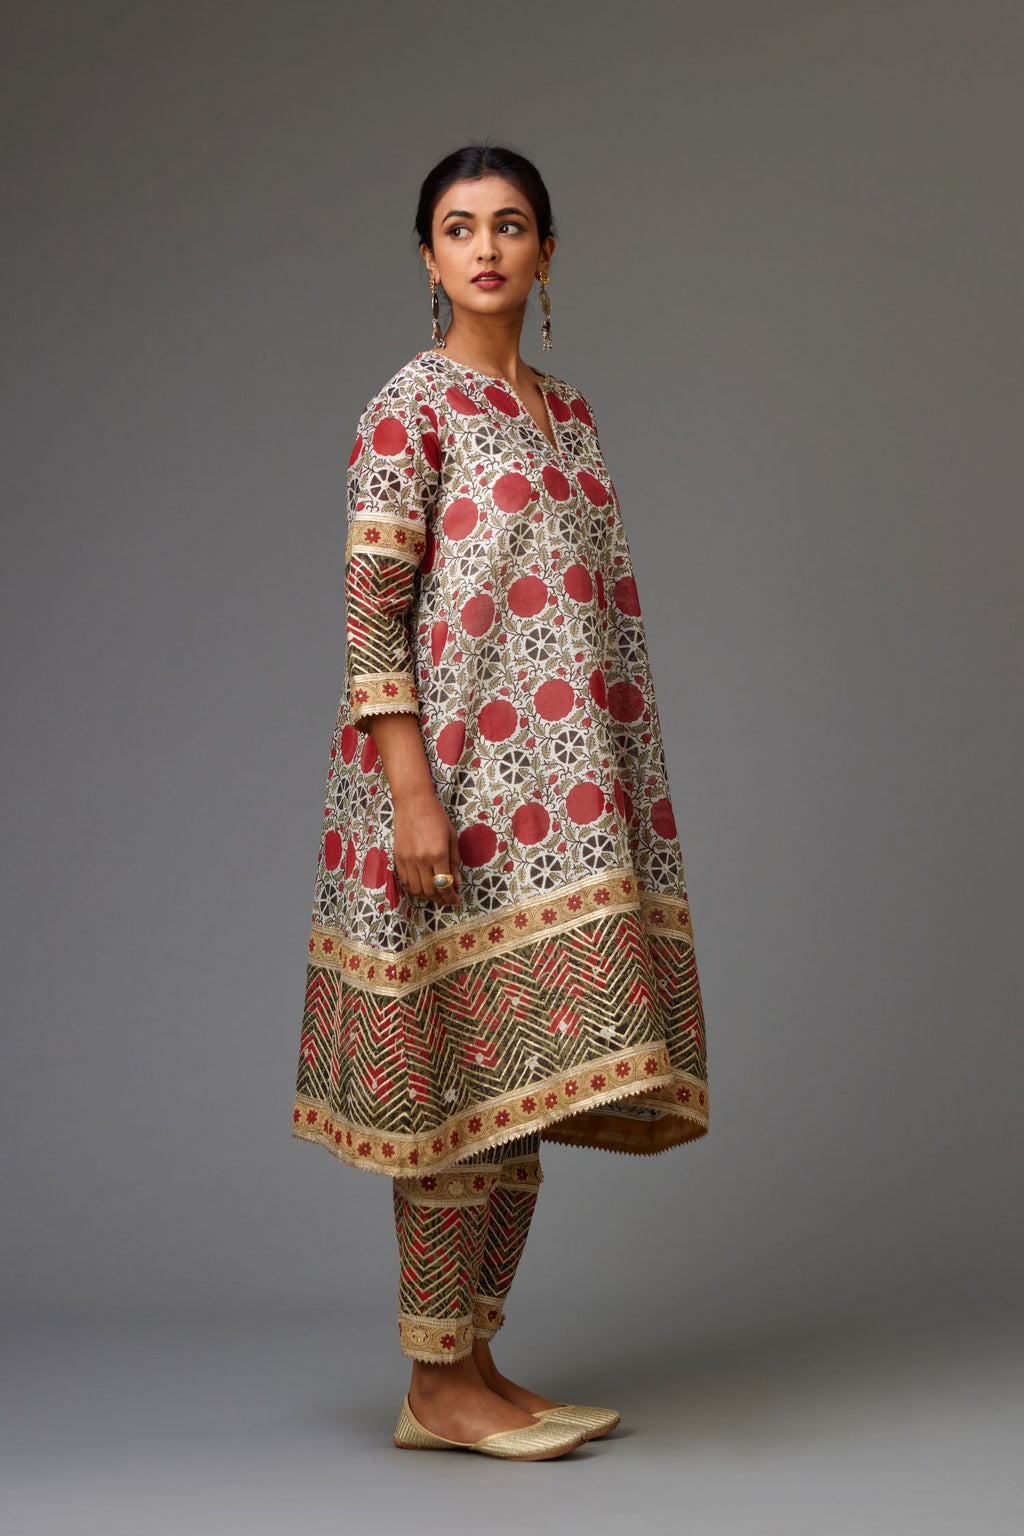 Red and off white hand block printed short A-line kurta set, detailed with gold gota and flowers.